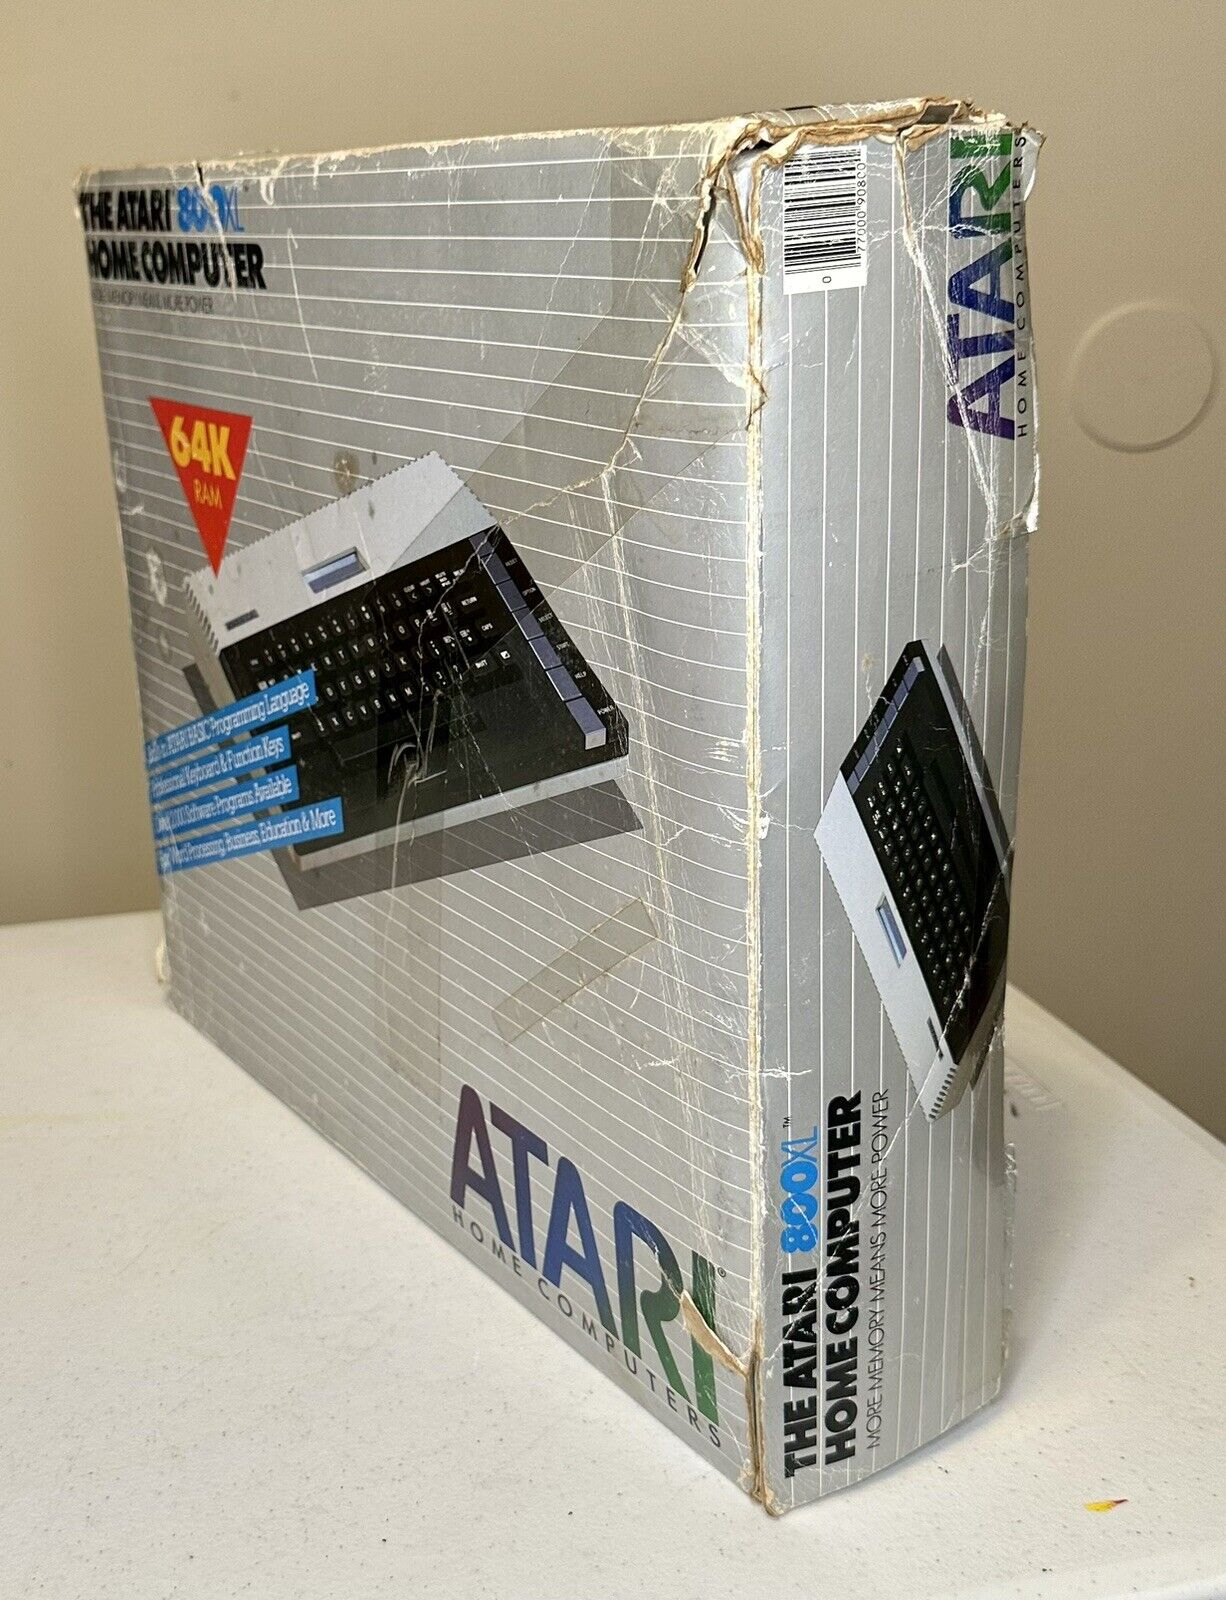 Atari 800XL Home Computer Original Box Packaging, Power Supply Cables Never Used